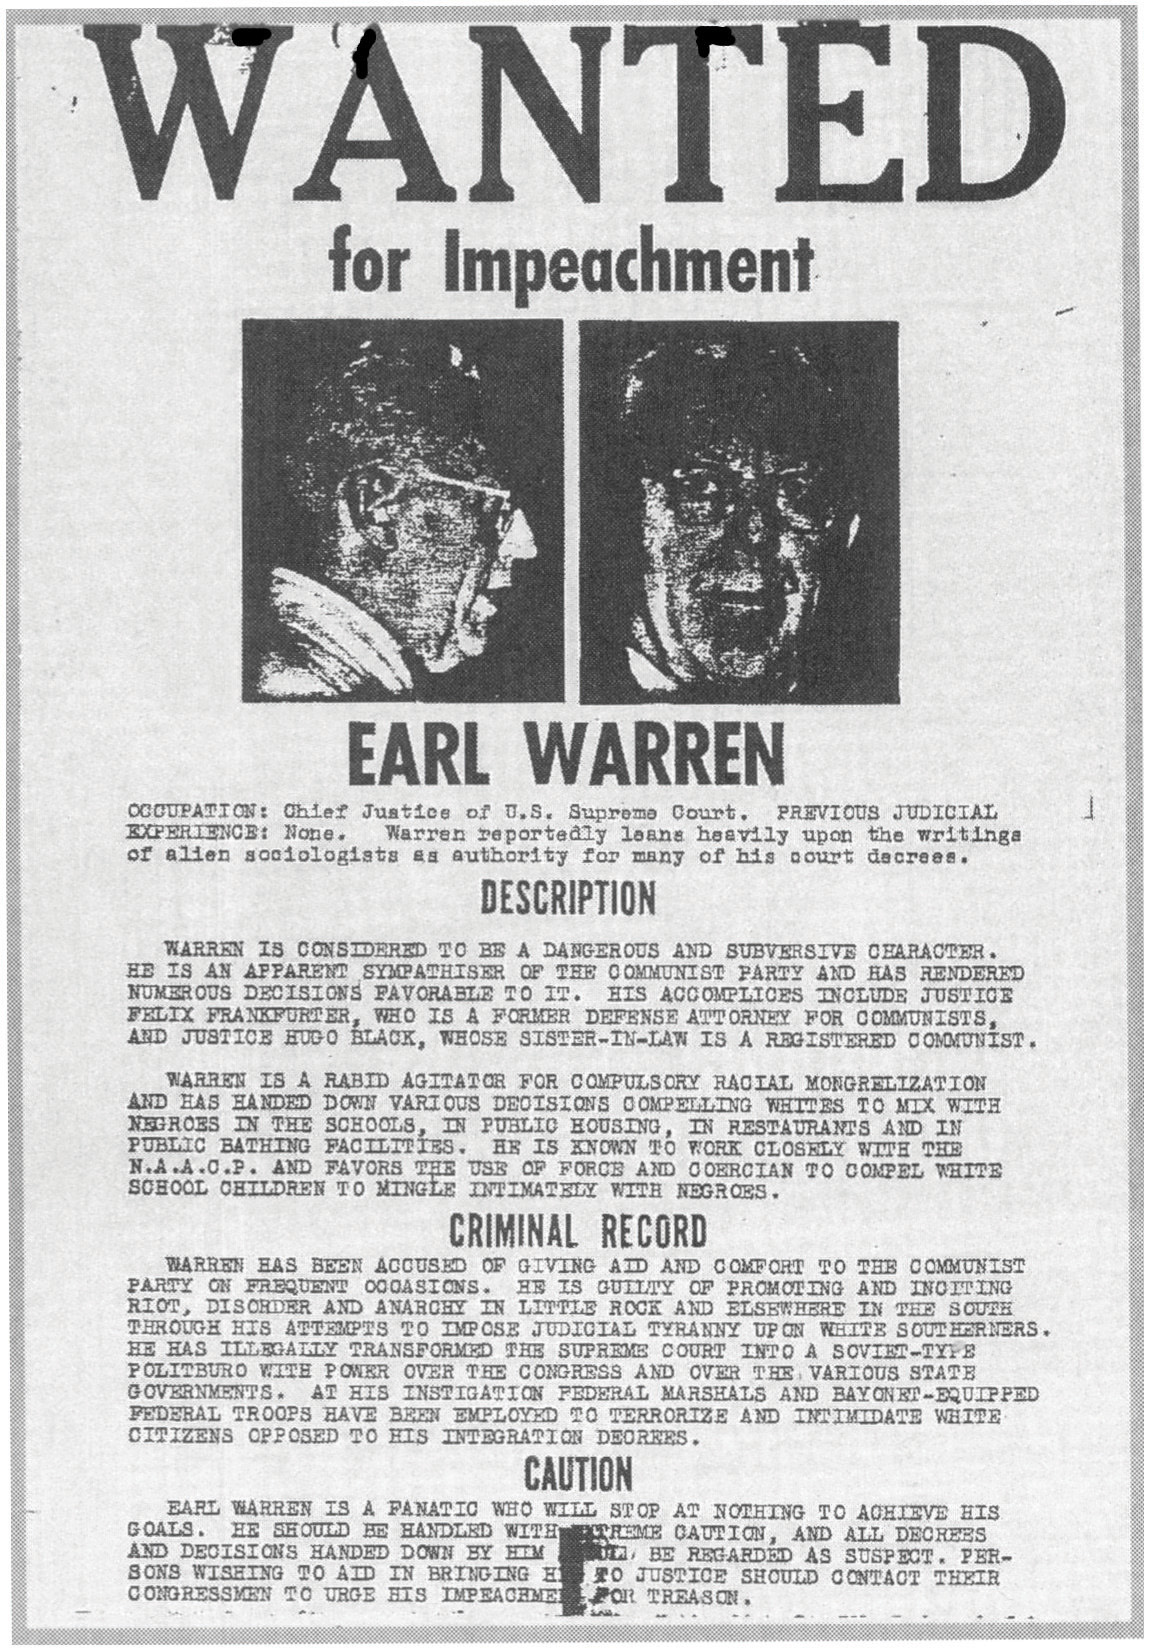 A flyer printed in the old-fashioned style of "Wanted" posters. It reads, "Wanted for impeachment," with mug shots of Earl Warren beneath, and the following sections: "Description," "Criminal Record," and "Caution."